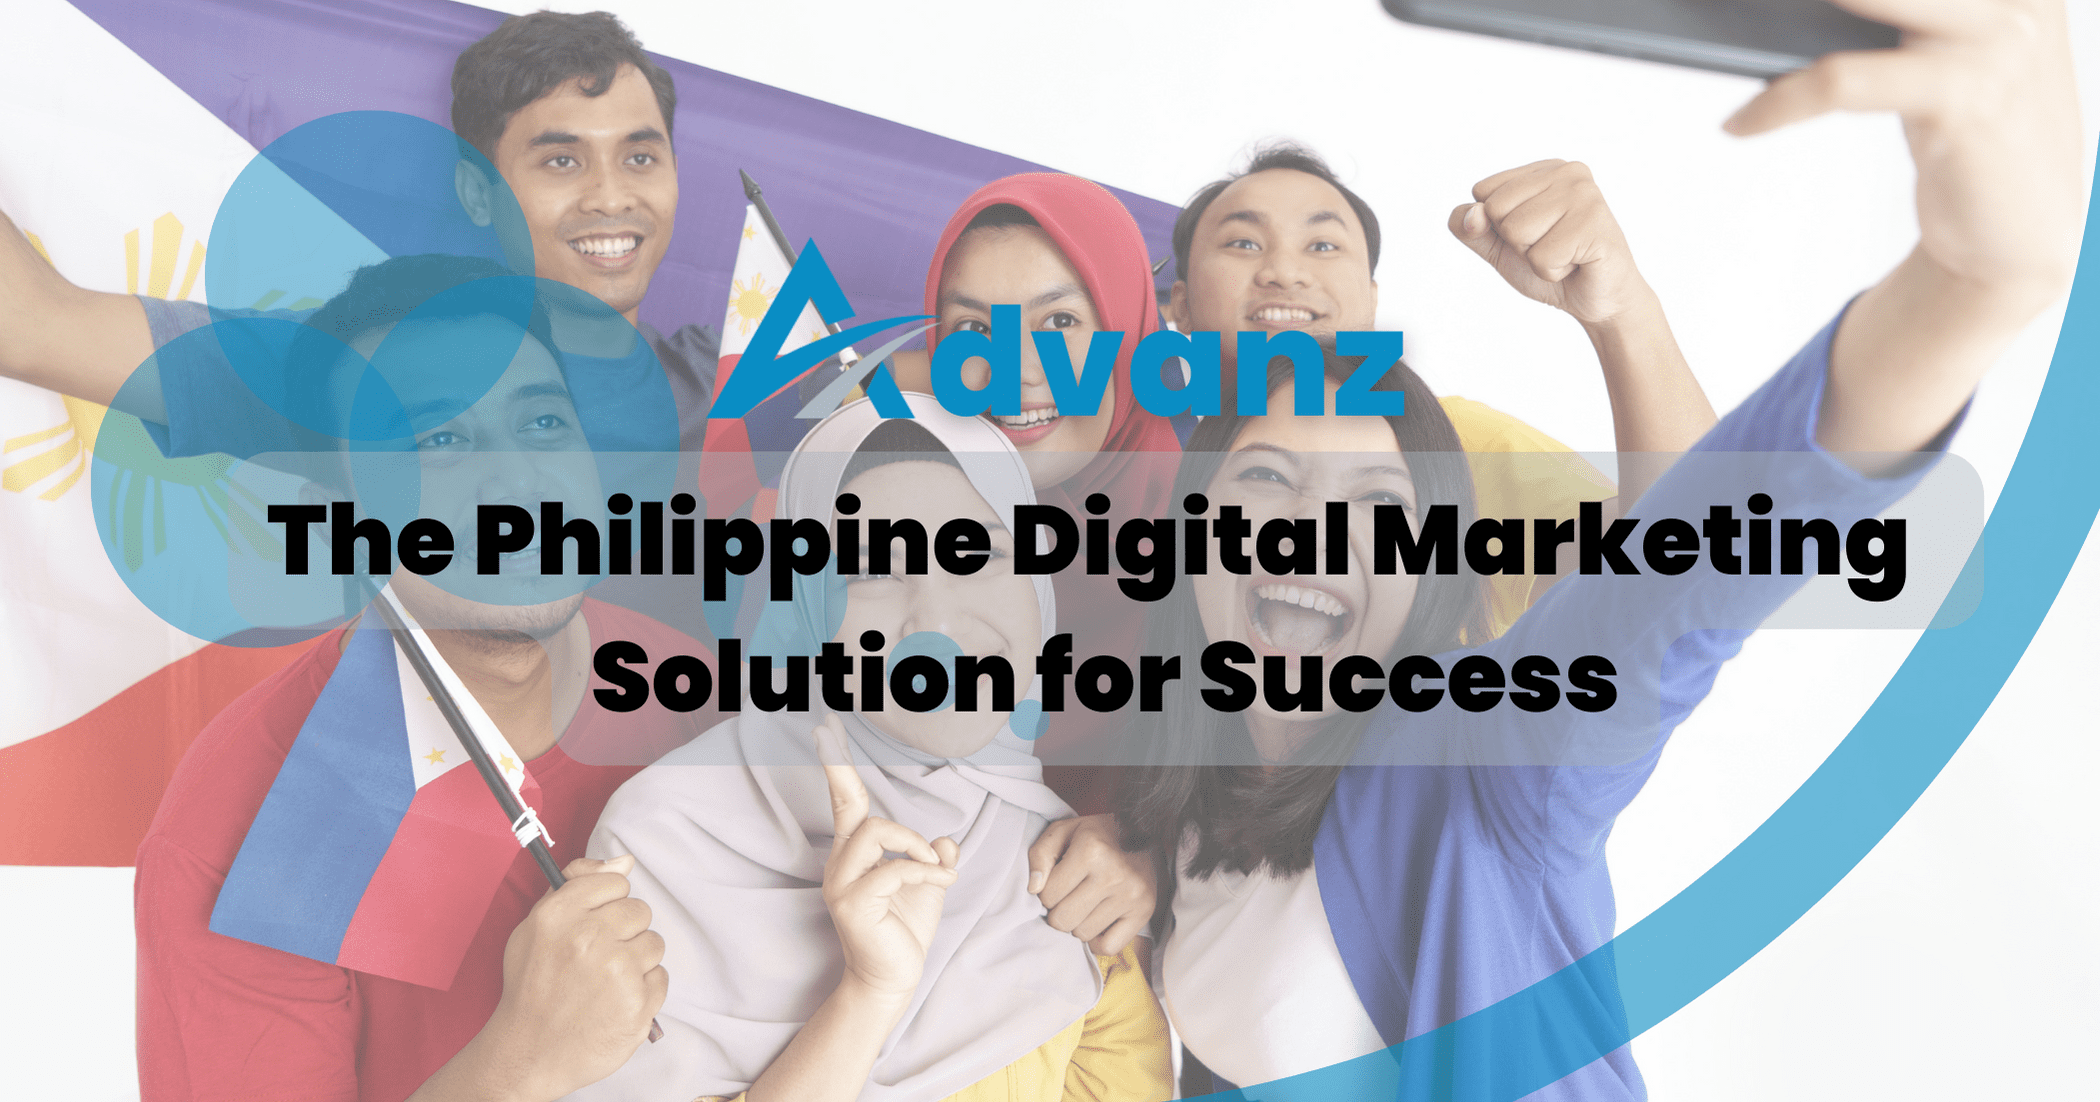 The Philippine Digital Marketing is a Great Business Solution for Success